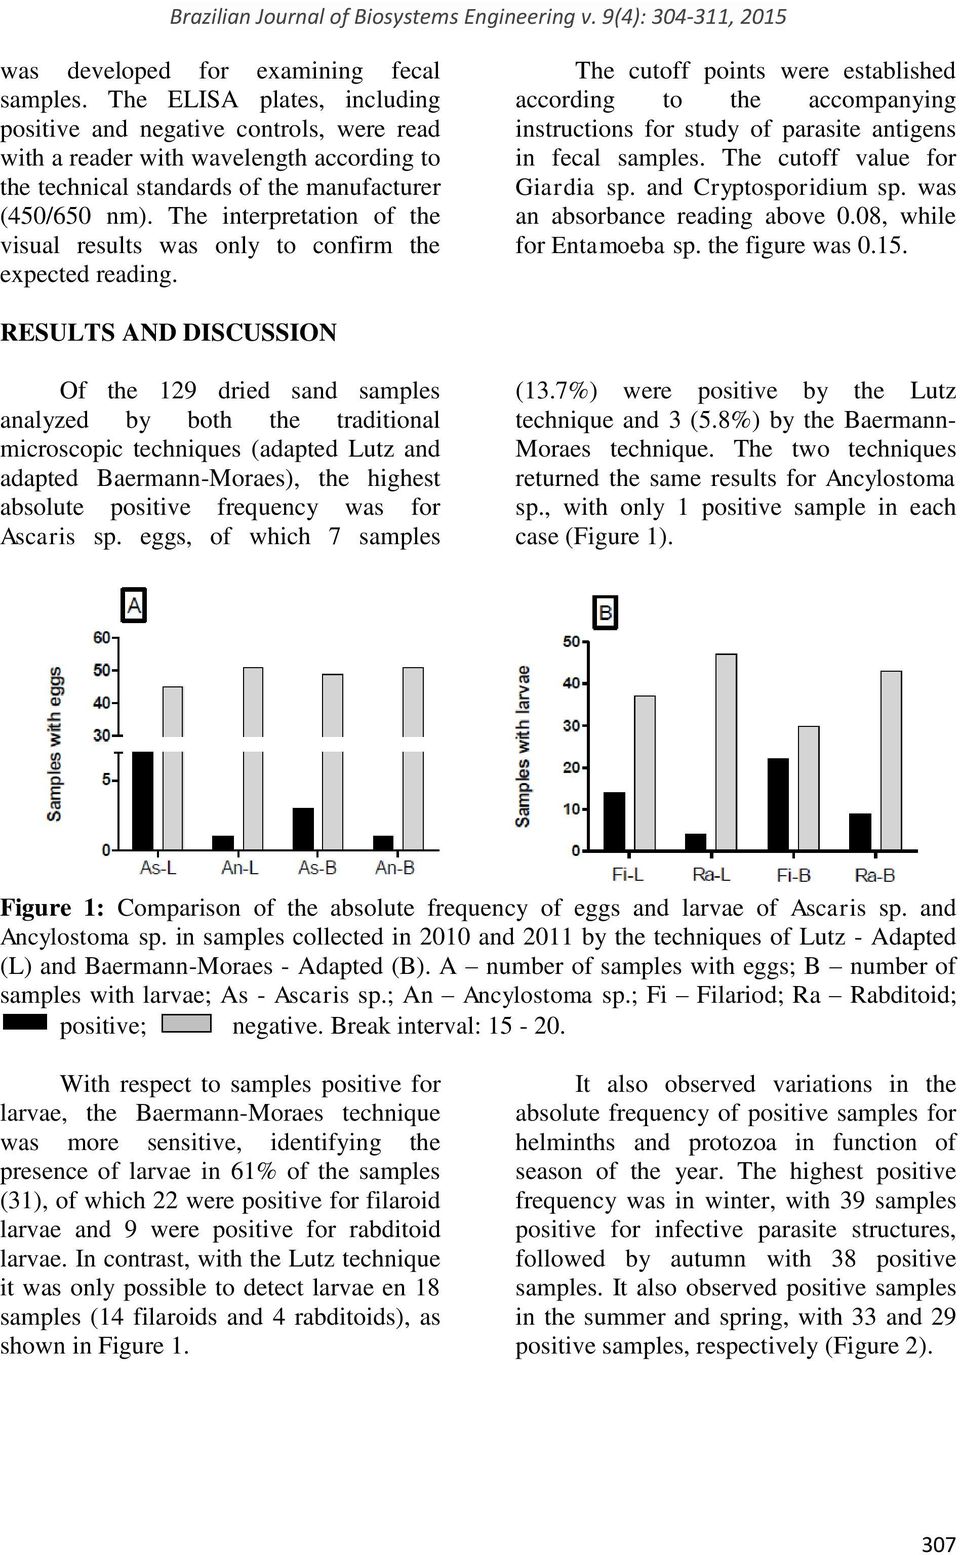 The interpretation of the visual results was only to confirm the expected reading.